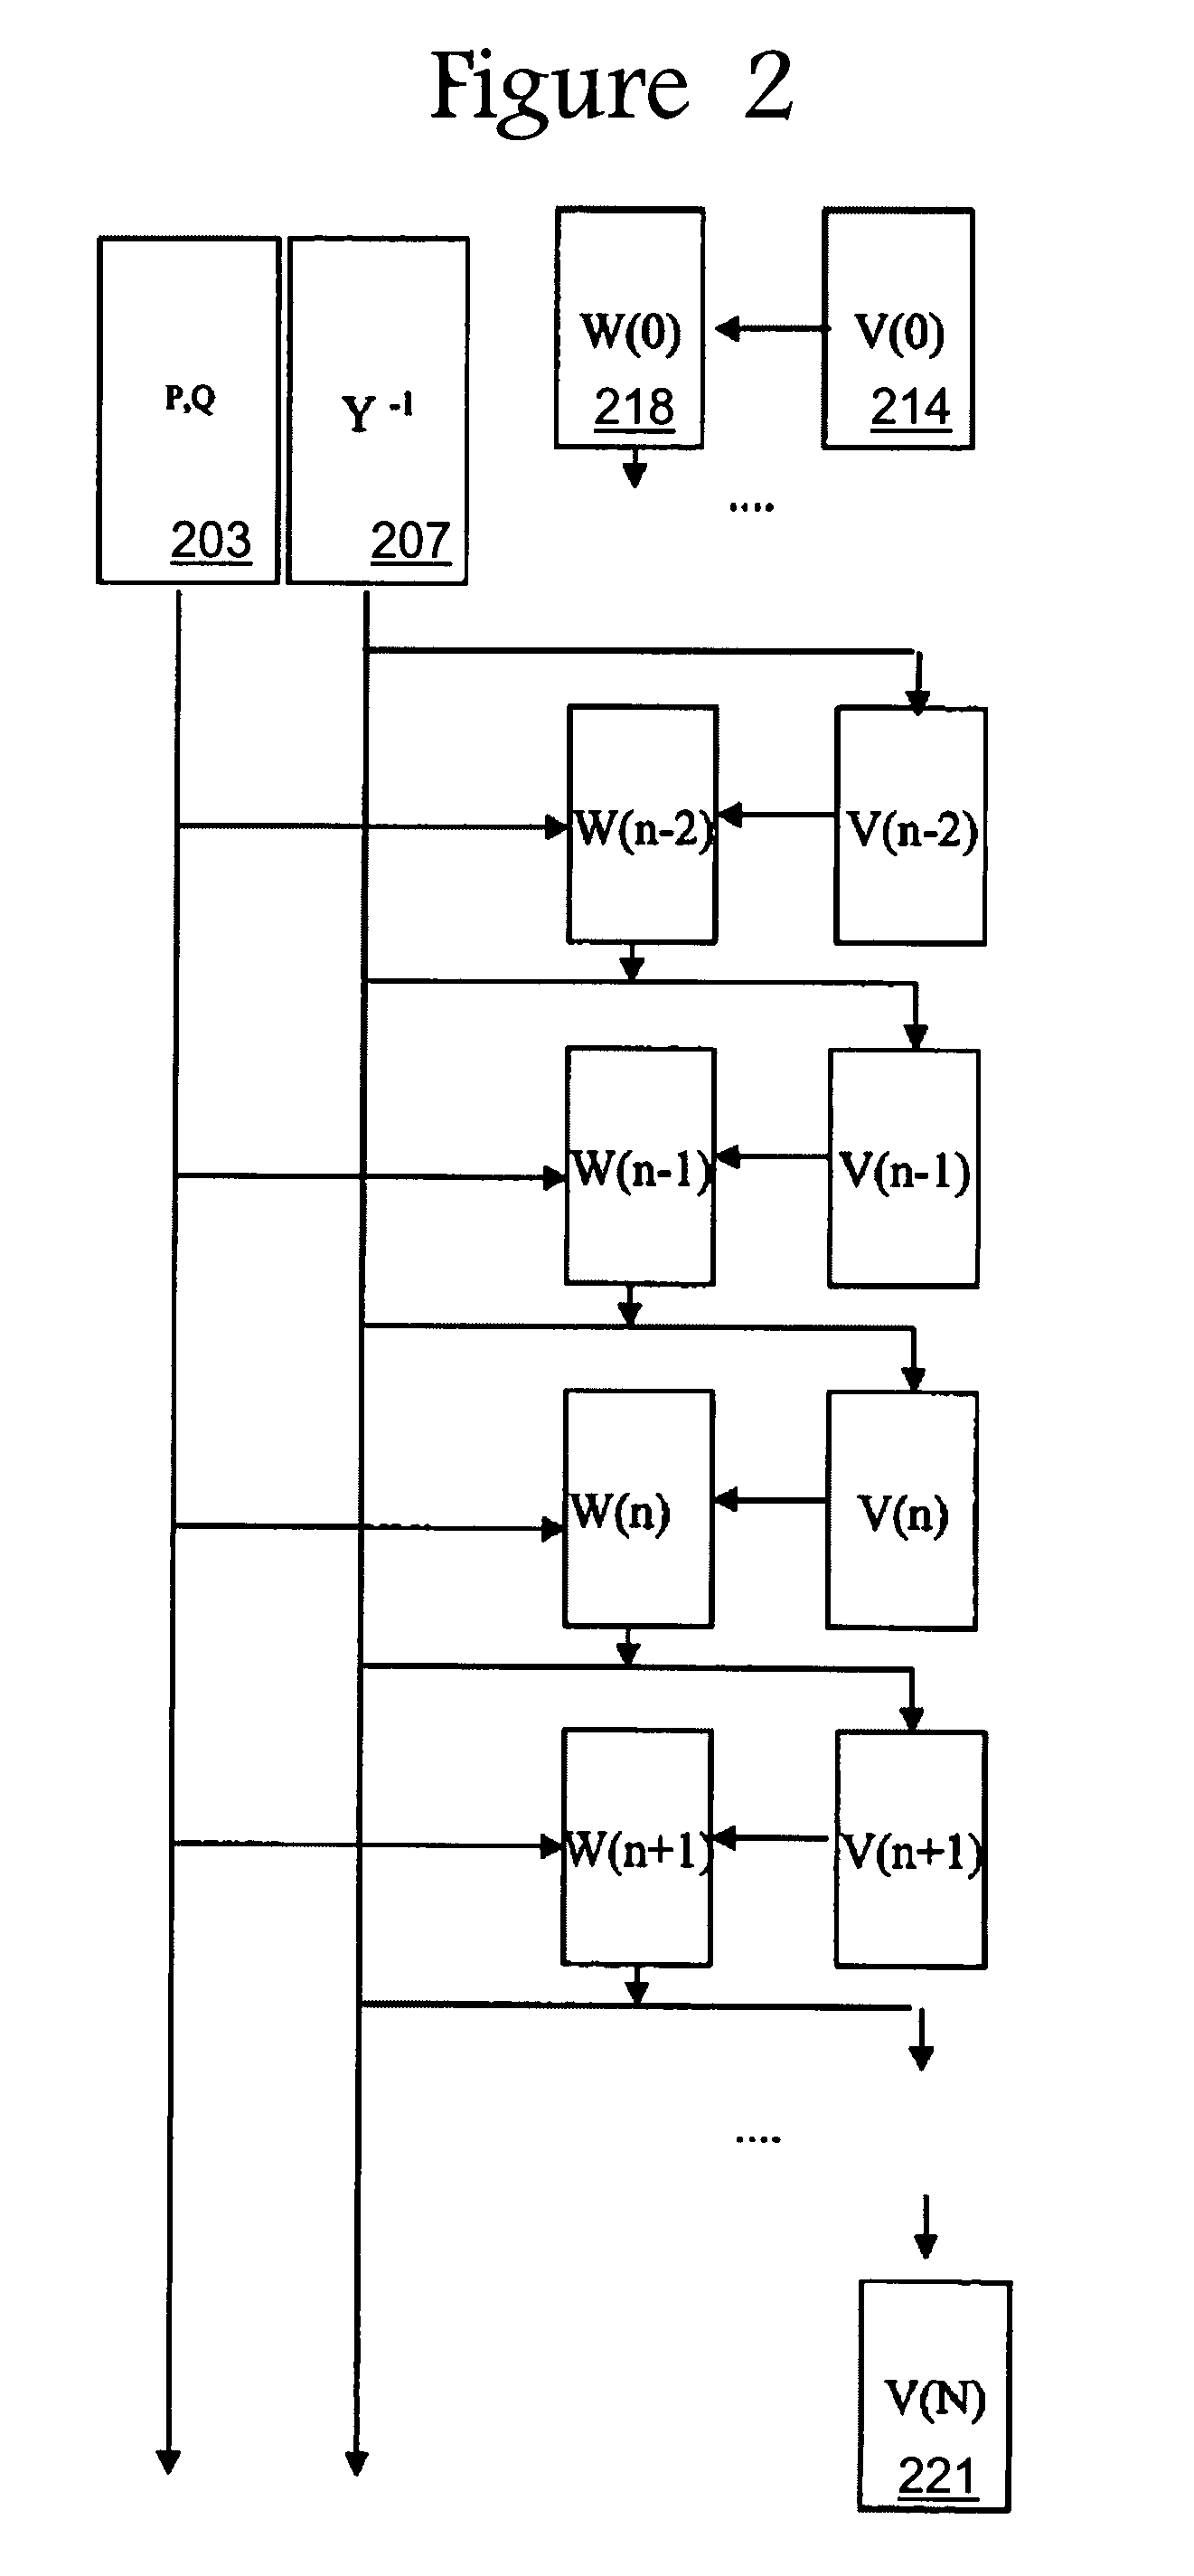 System and method for monitoring and managing electrical power transmission and distribution networks